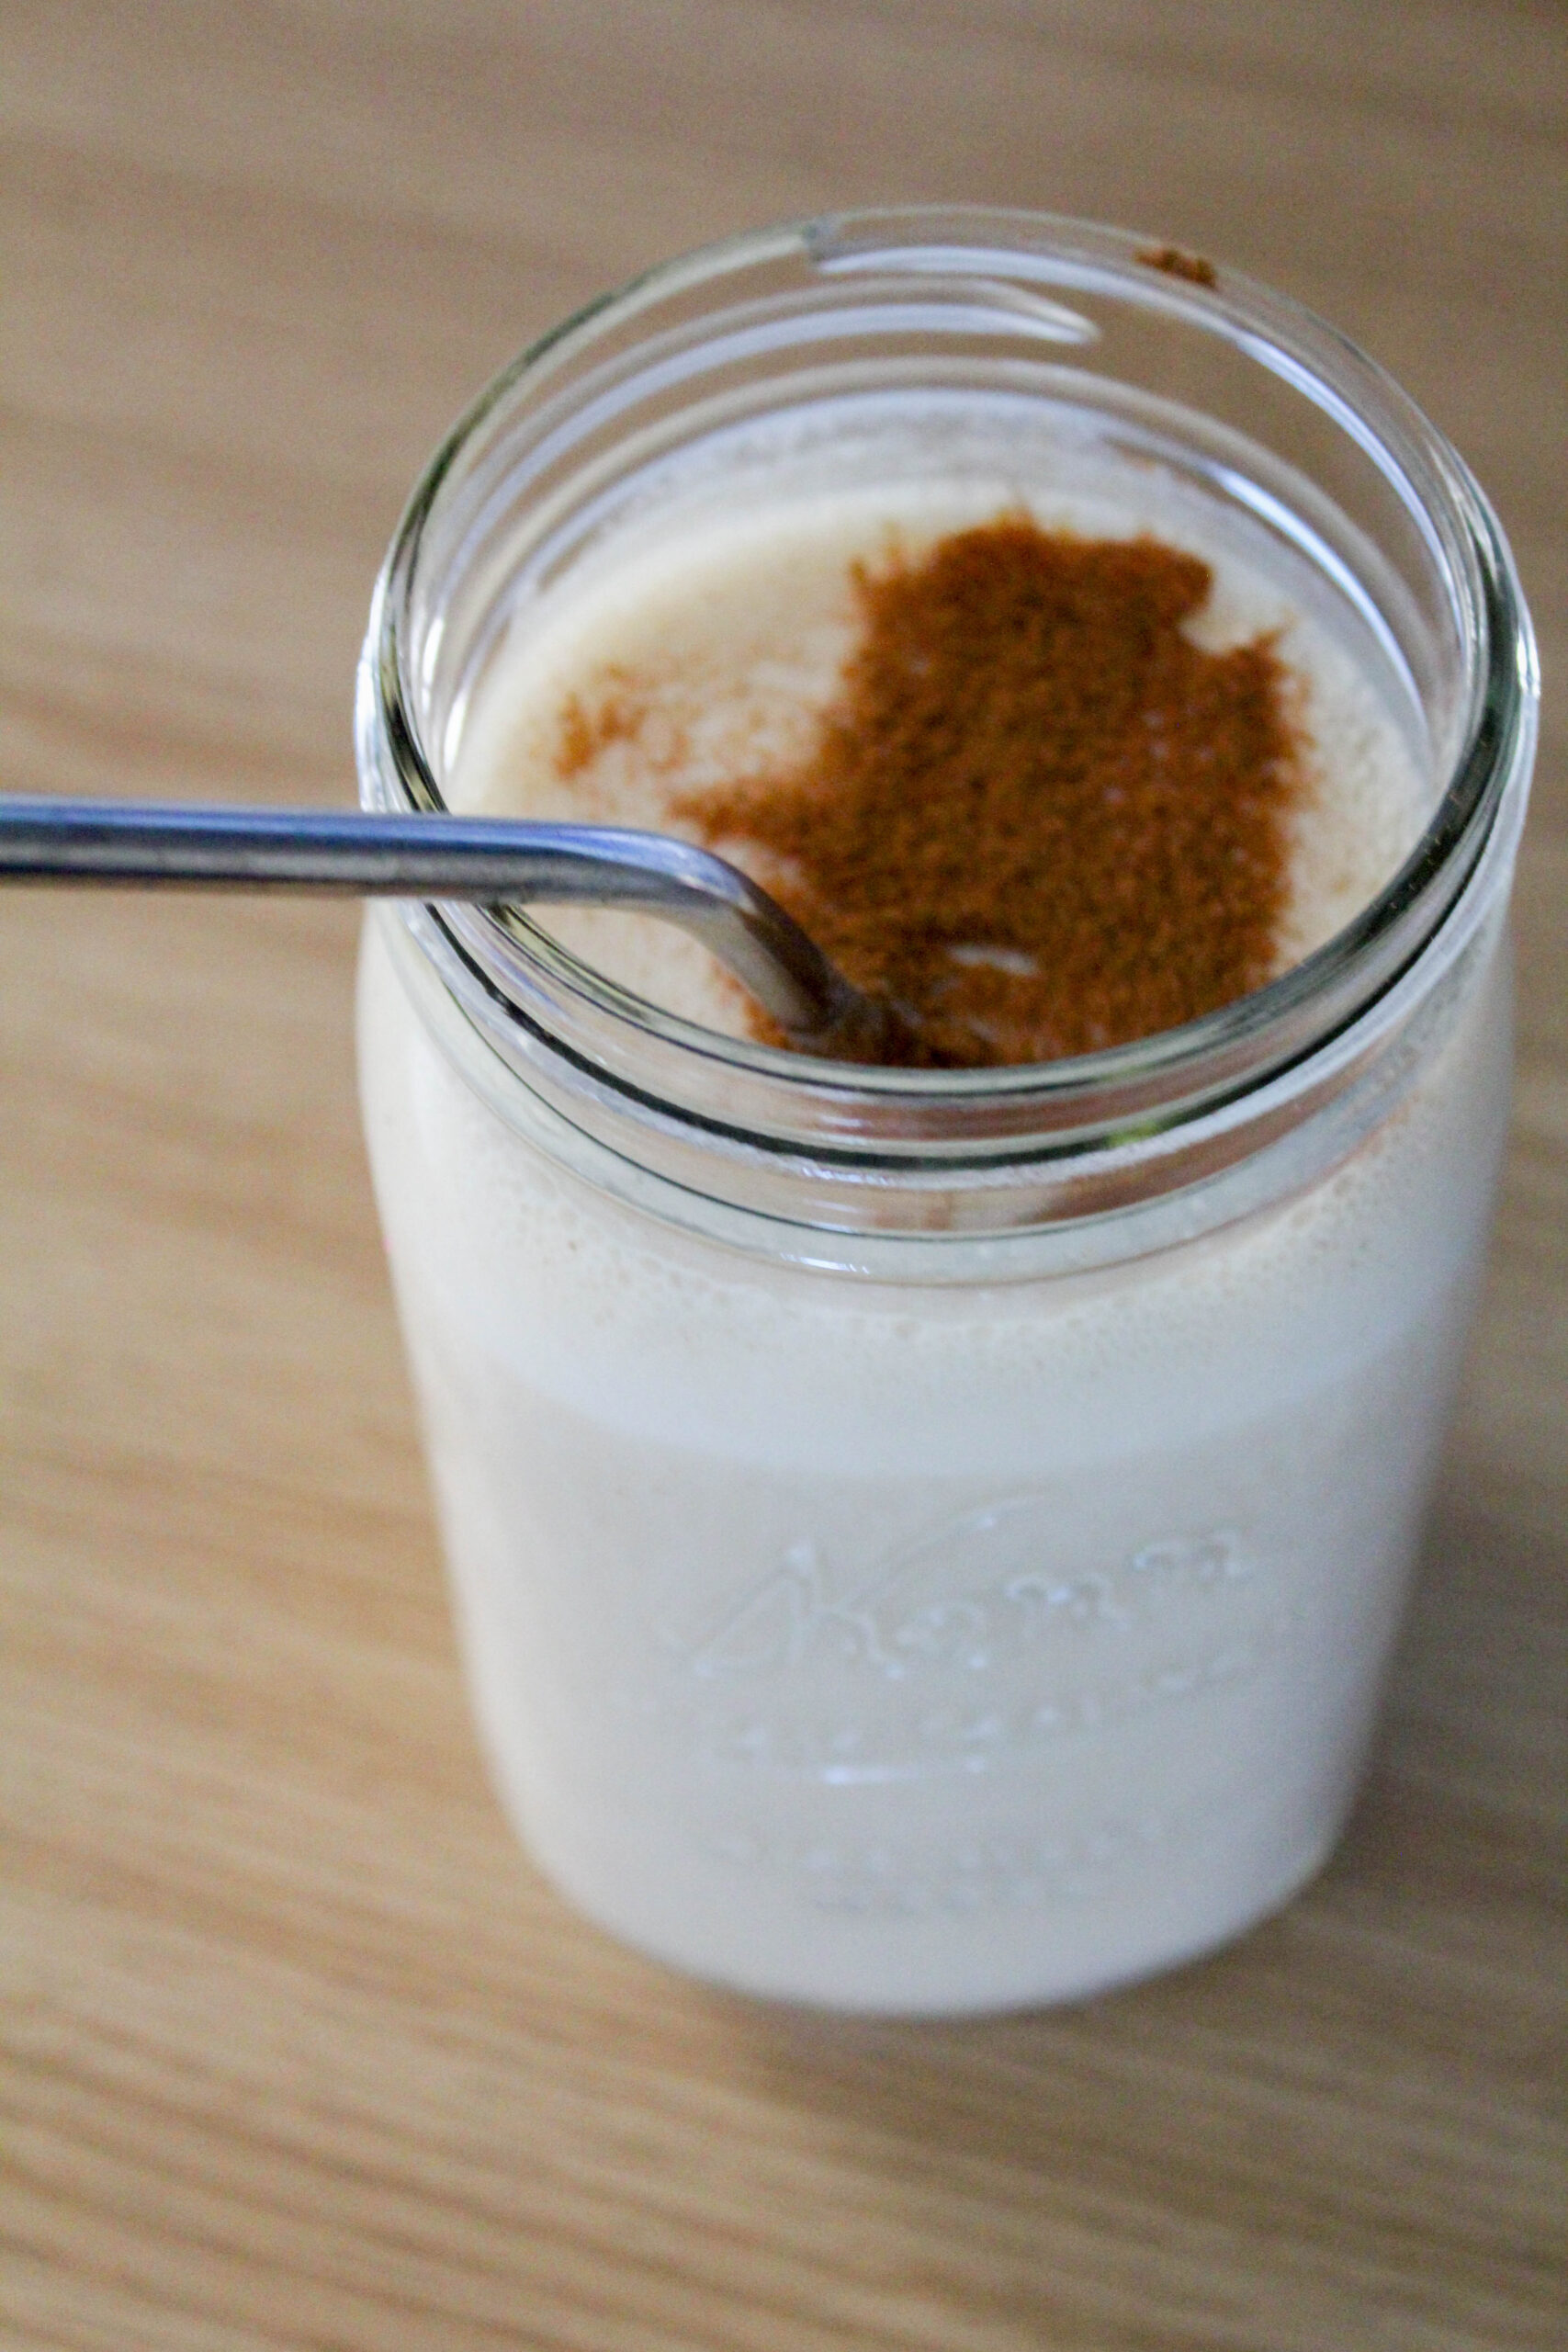  My Pumpkin Roll Shake is creamy, perfectly spiced and tastes like cake in a cup. This recipe is a THM:S, sugar-free, and keto friendly.